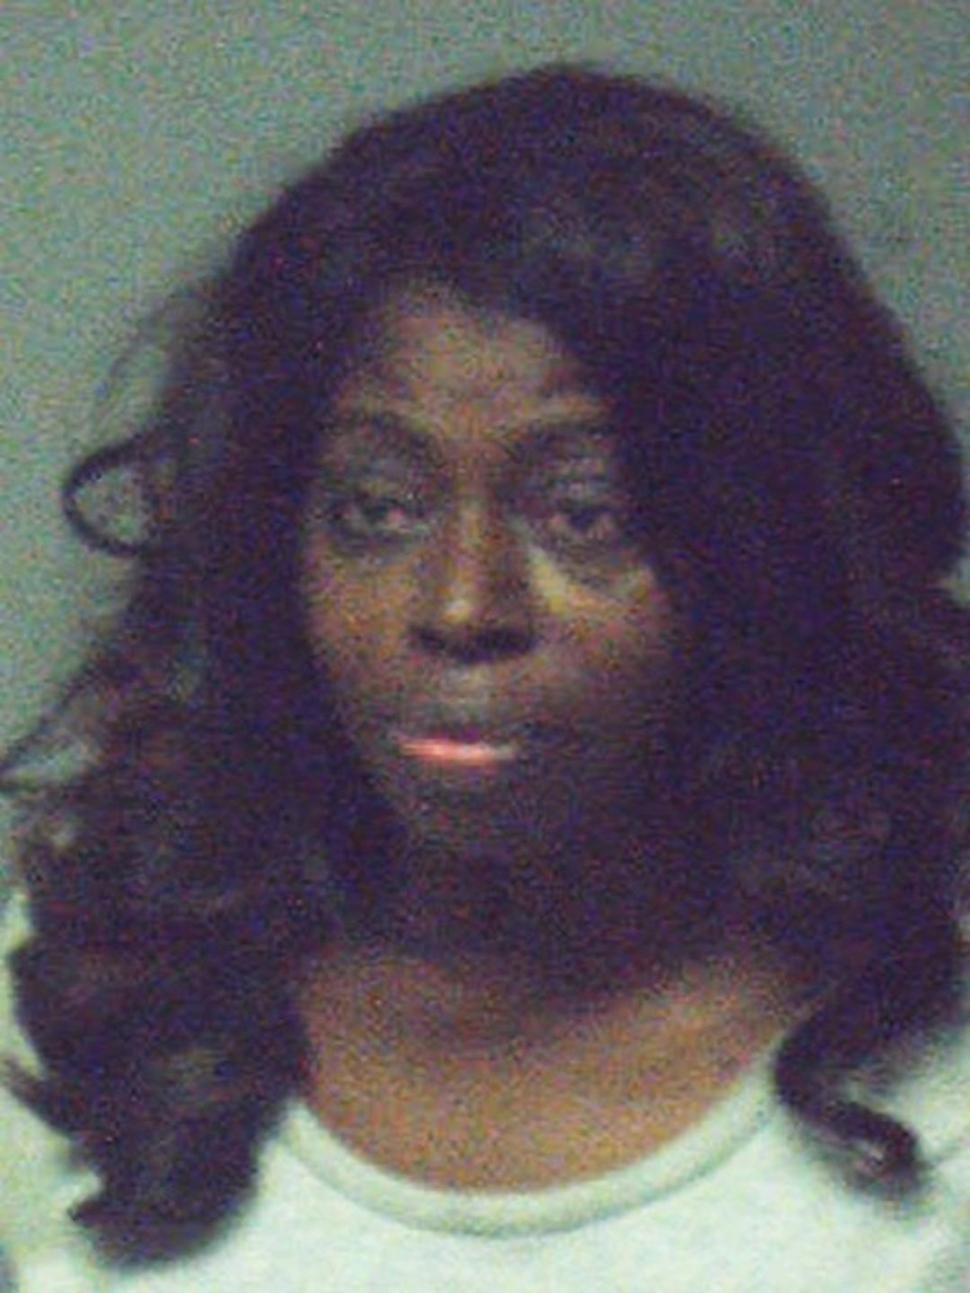 Grammy-nominated singer Angie Stone was arrested on an assault charge after she allegedly knocked her 30-year-old daughter's front teeth out with a metal stand.